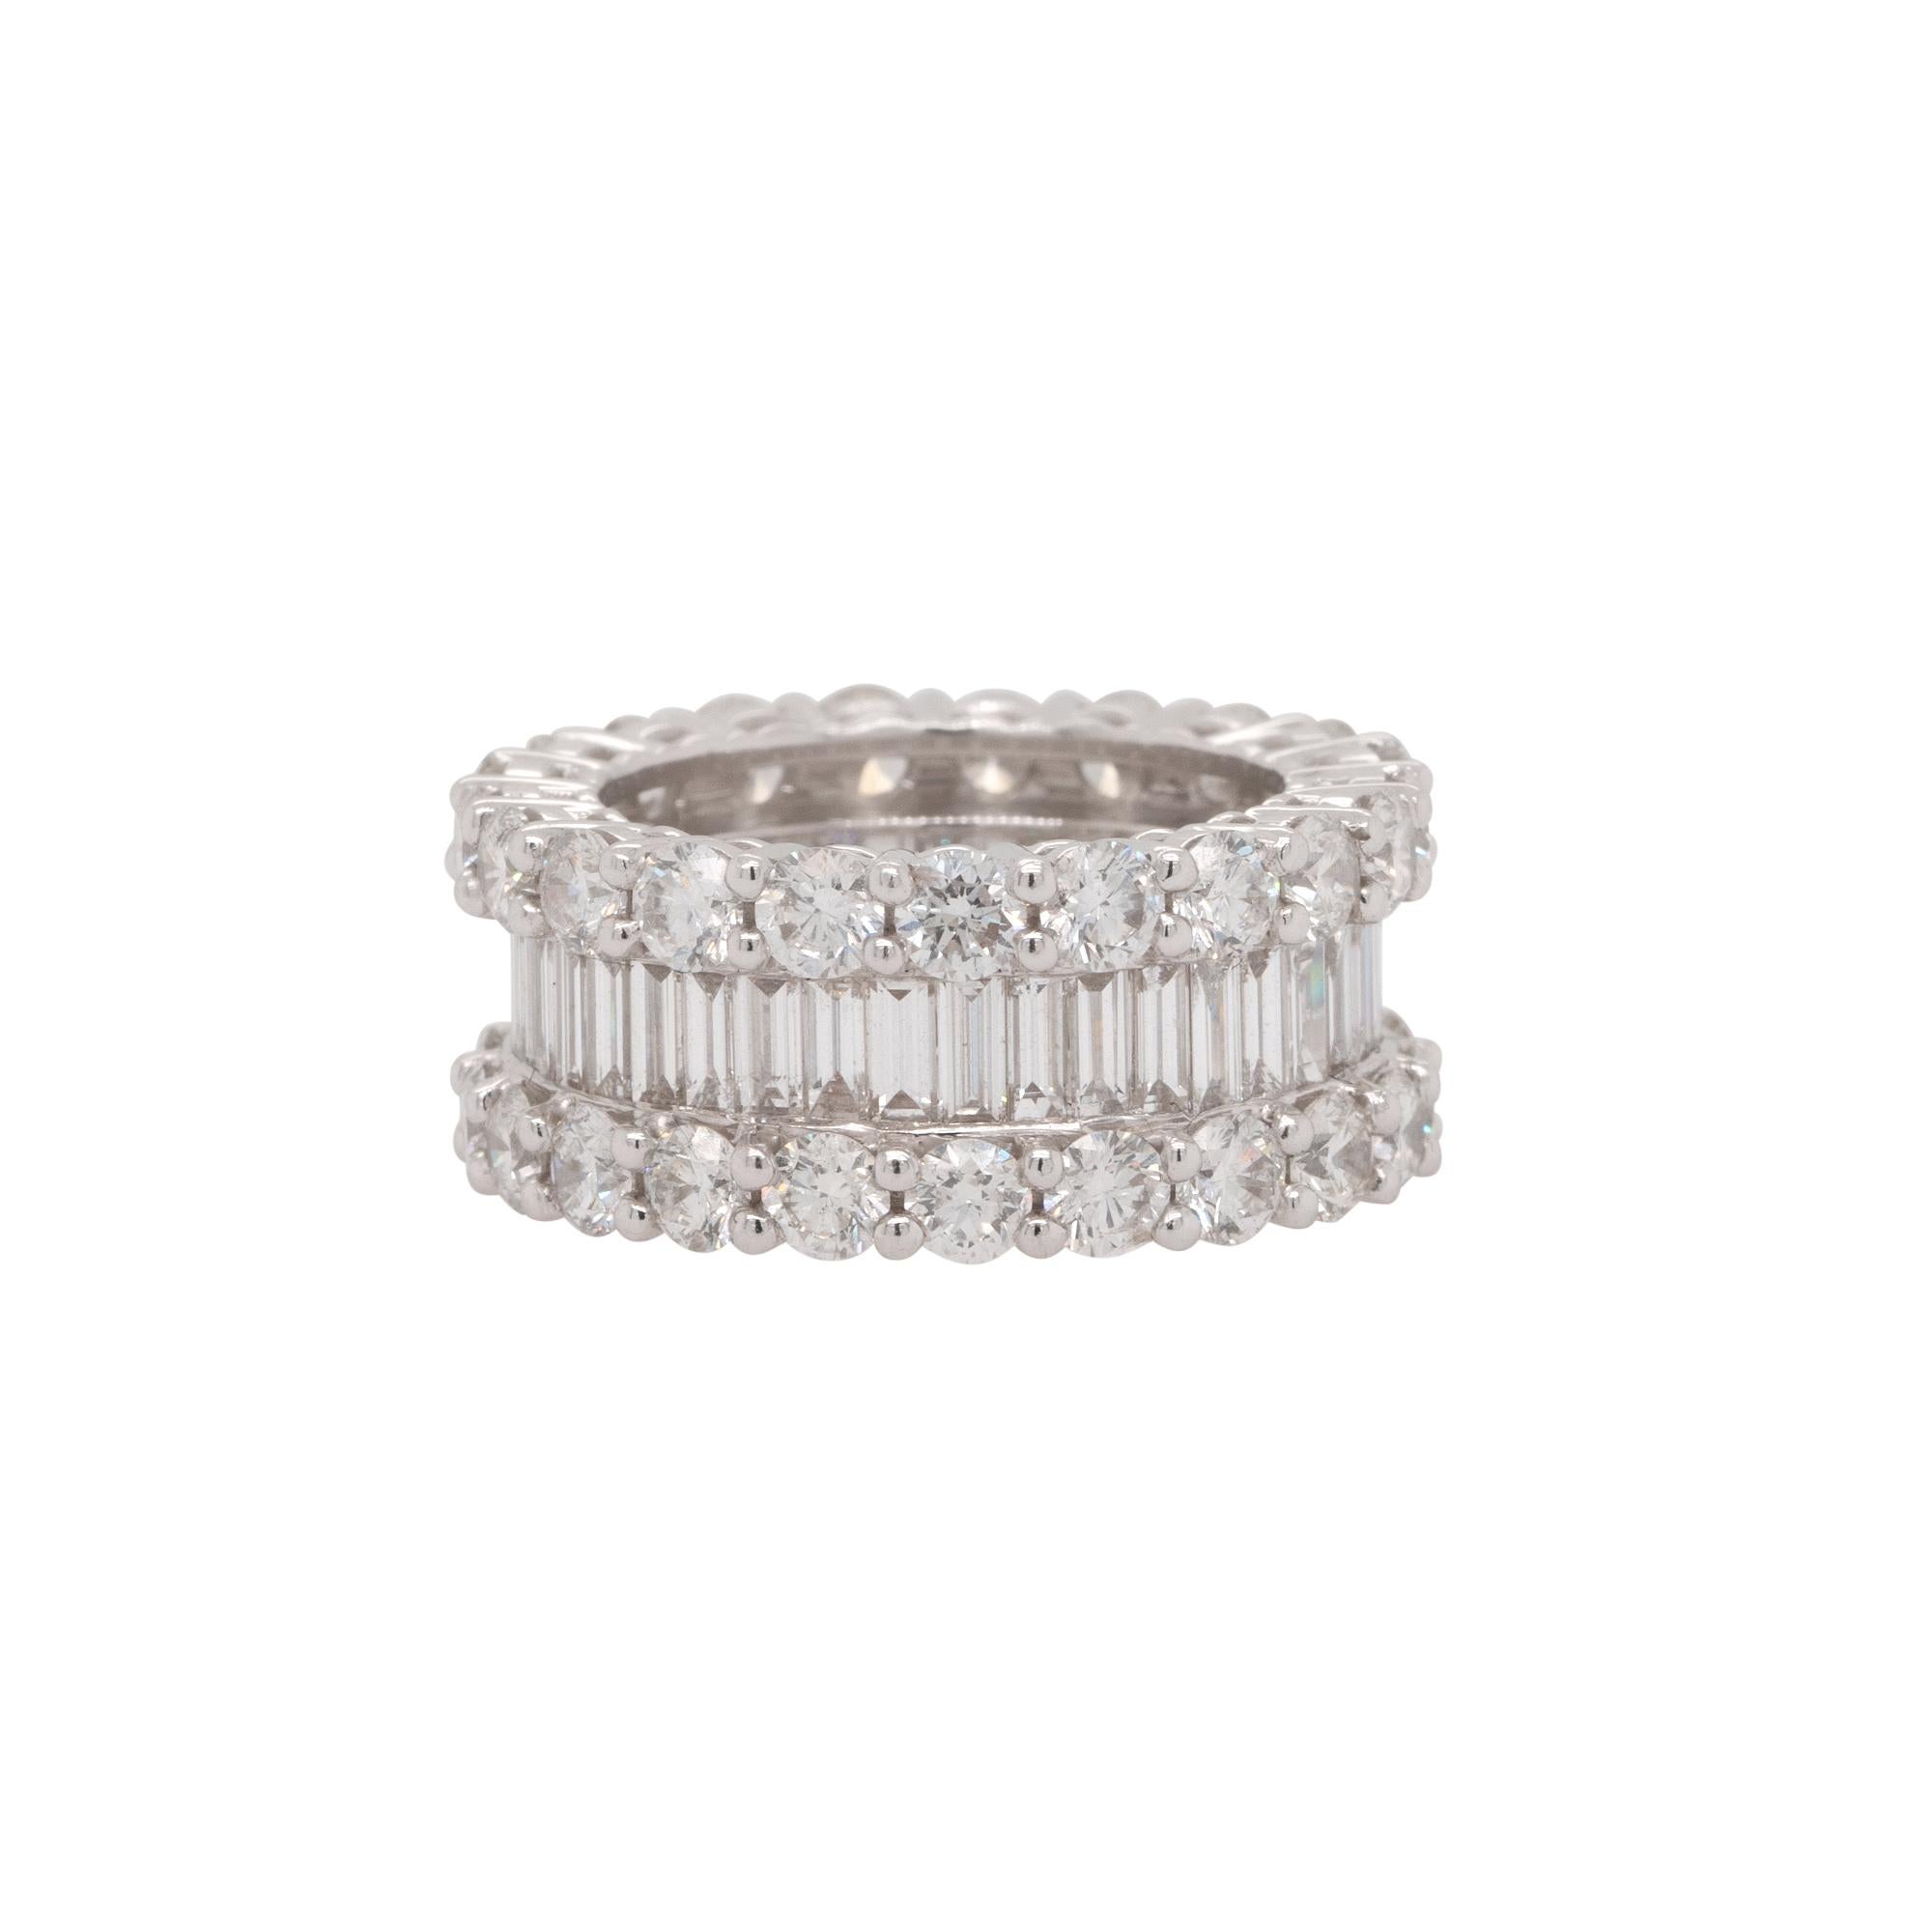 Material: 18k White Gold
Diamond Details: Approx. 8.55ctw of round and baguette cut Diamonds. Diamonds are G/H in color and VS in clarity
Ring Measurements: 25mm x 10 mm x 25mm
Ring Size: 7
Total Weight: 11.8g (7.6dwt)
Additional Details: This item